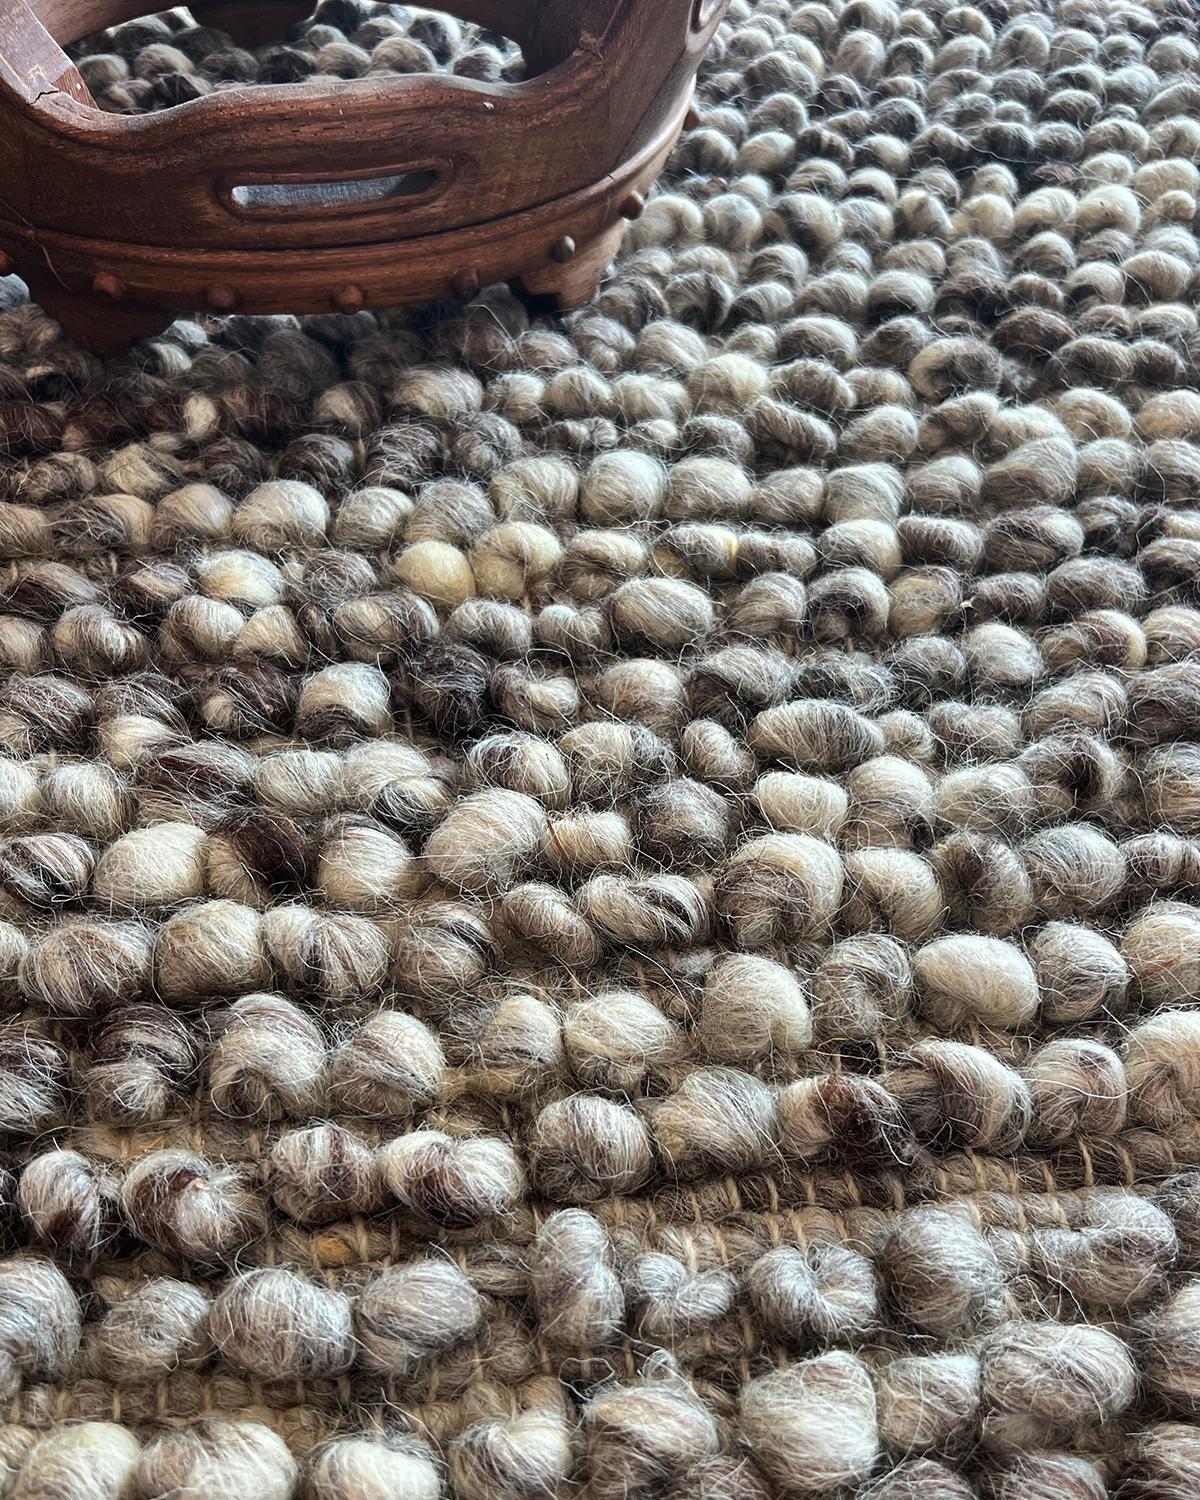 Hand-Woven Fatima Half Bobble Sheep Wool Area Rug in Gray 2.5ft by 4ft, Handmade For Sale